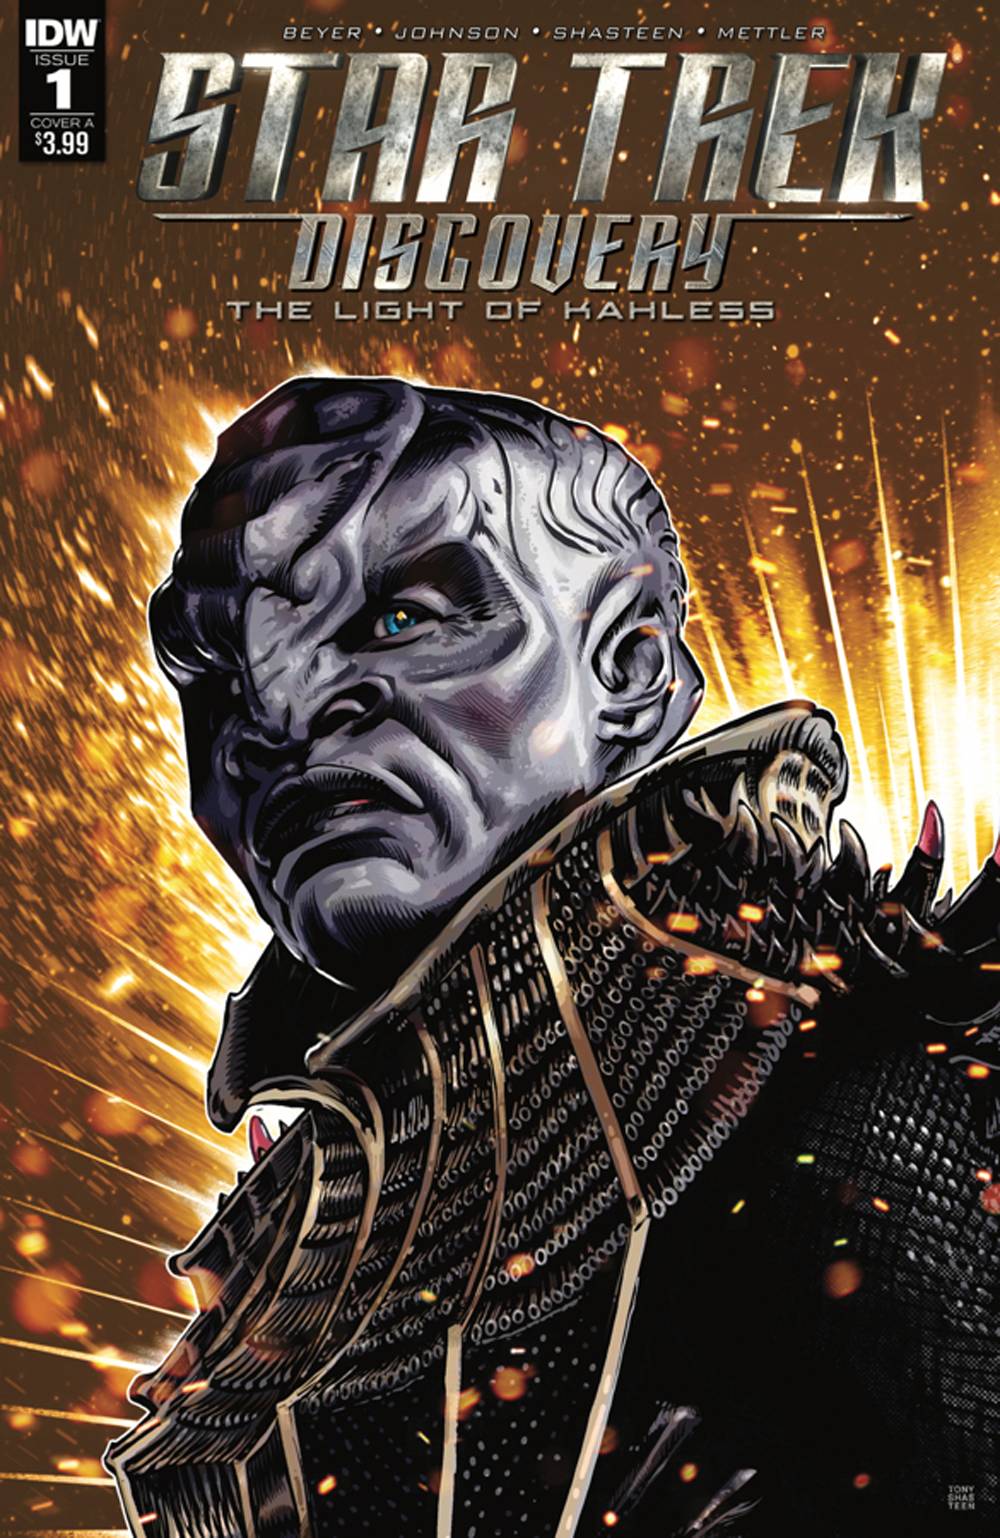 Star Trek Discovery #1 Cover A Shasteen